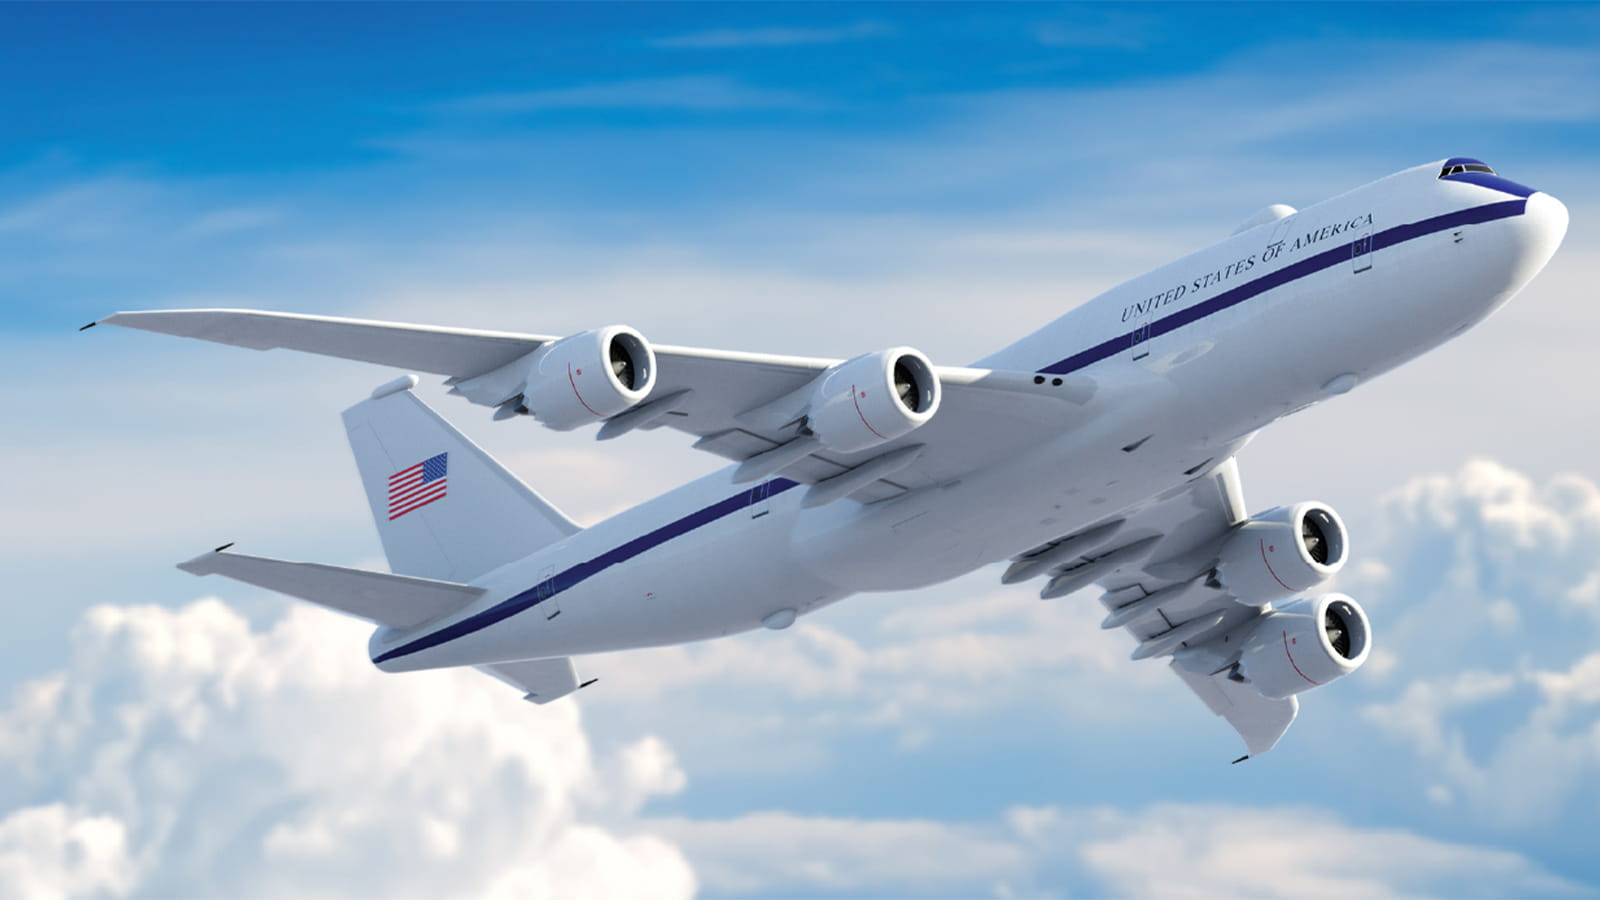 a rendering of an airplane branded United States of America